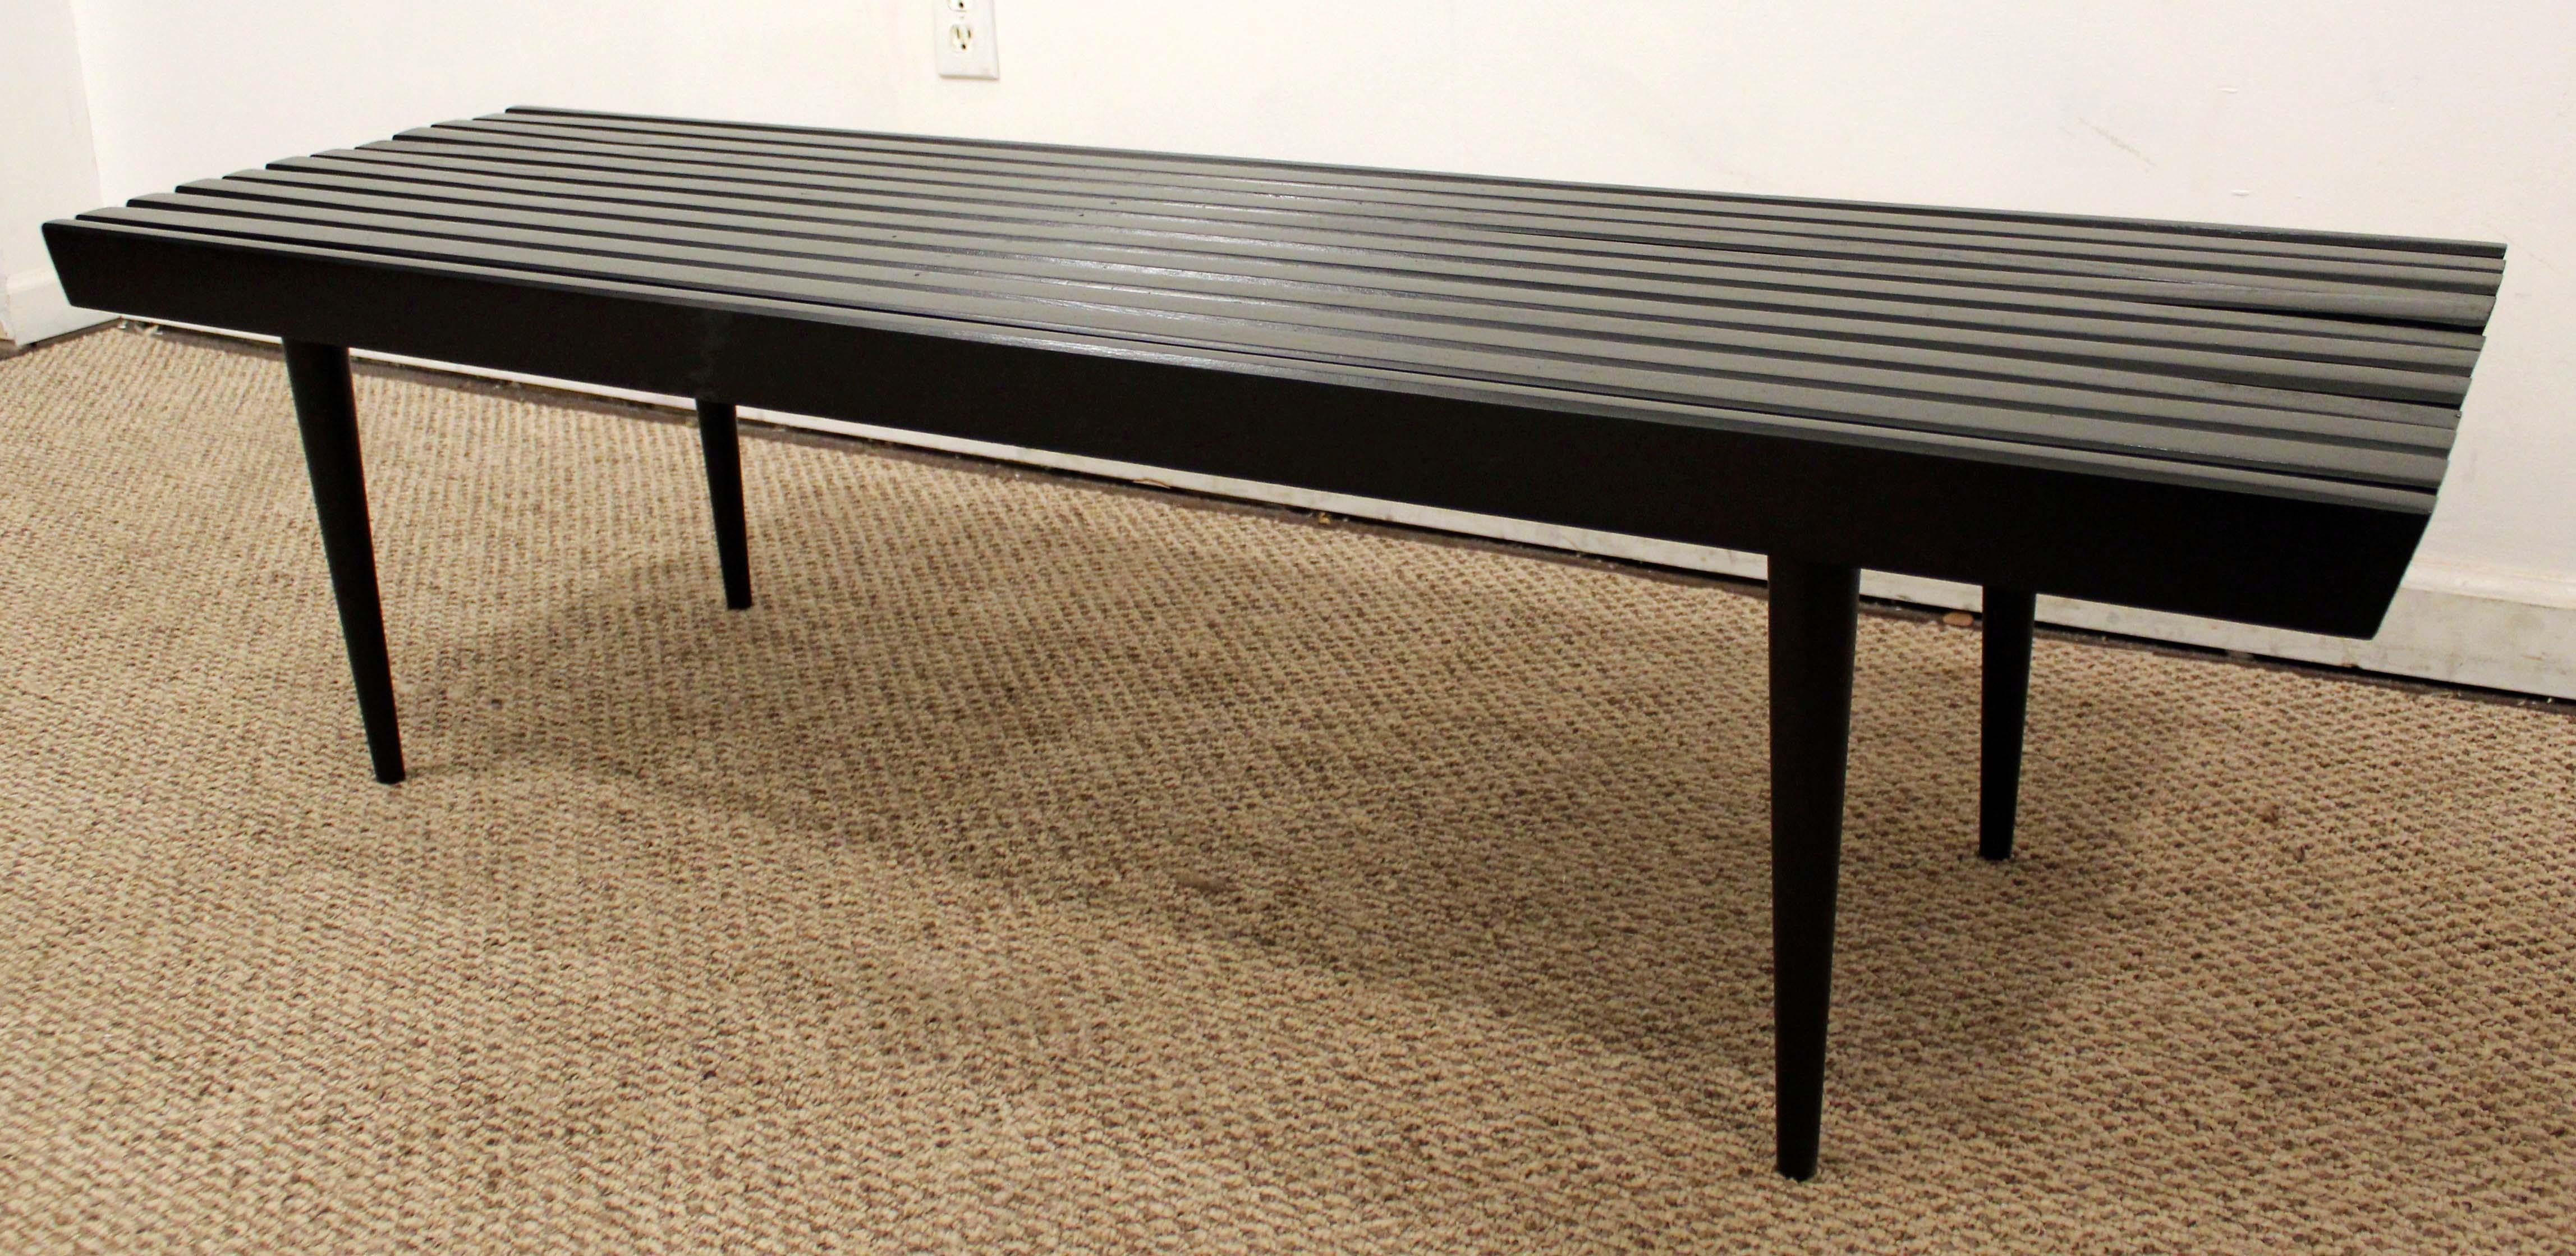 What a find. Offered is a midcentury slat bench coffee table. It is made of walnut and has been painted black. The piece is in excellent condition considering its age. It is not signed. 

Dimensions: 
60